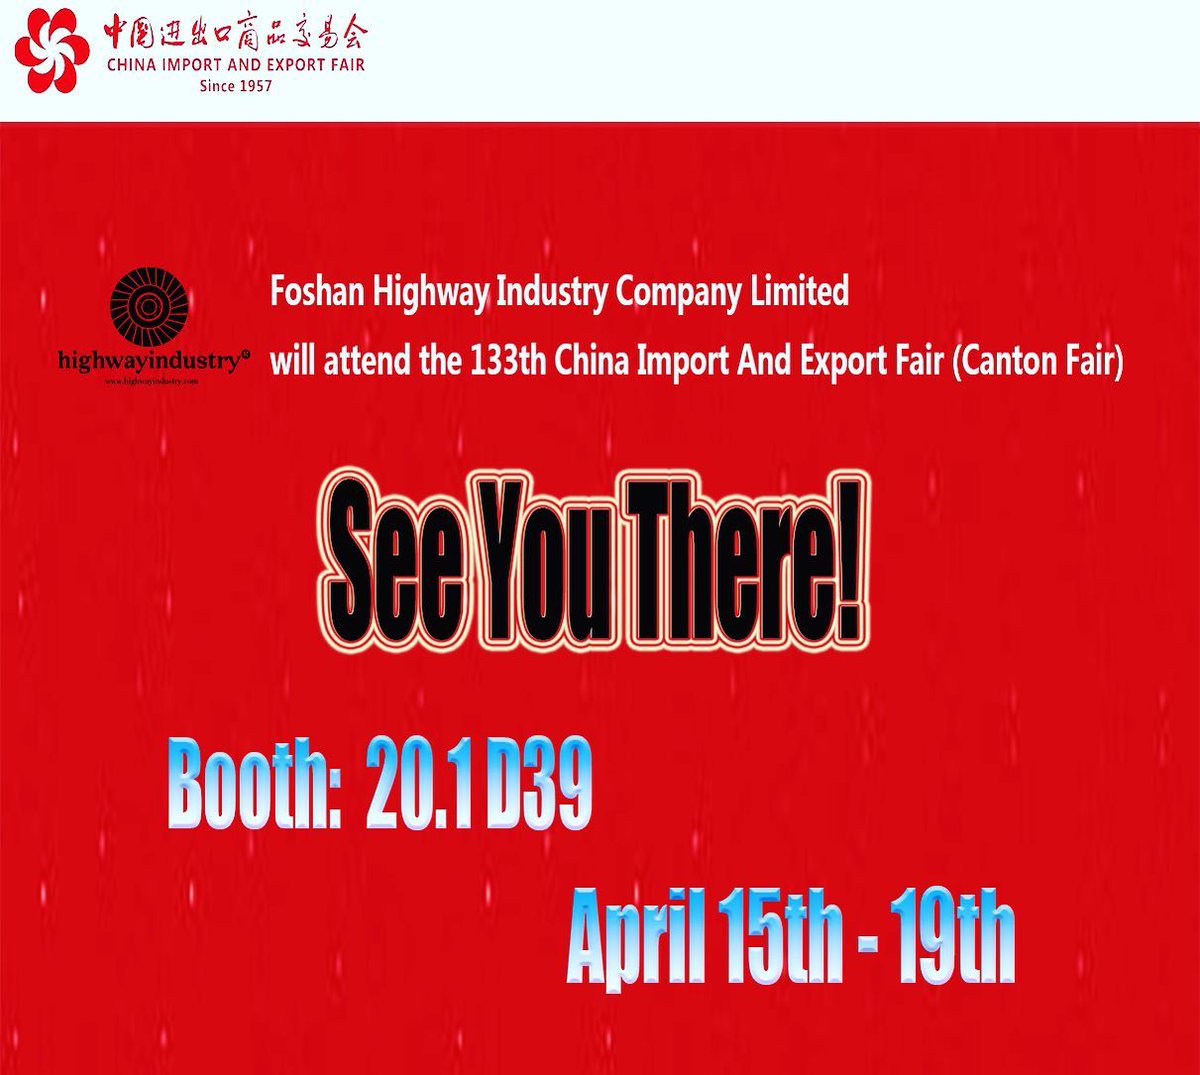 Highway industry will attend the Canton Fair tomorrow (on April 14th 2023 Saturday), welcome to visit our booth 20.1D39.
#Cantonfair #industrialexhibition #industrialfans #Highwayindustry #ventilationfactory